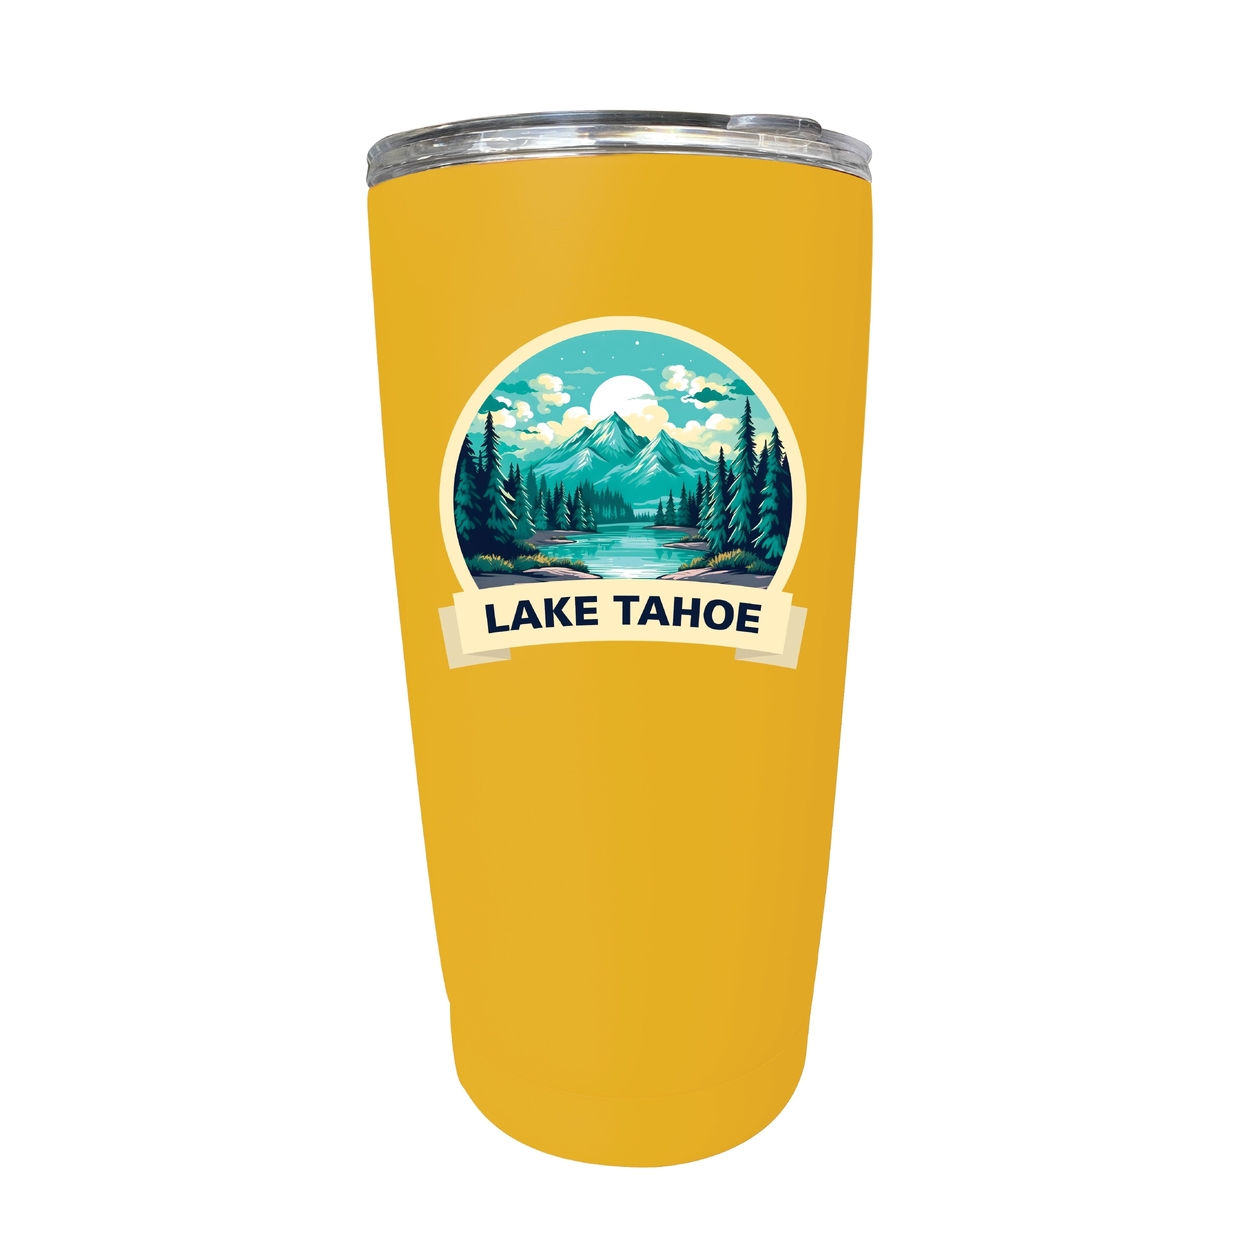 Lake Tahoe California Souvenir 16 Oz Stainless Steel Insulated Tumbler - Yellow,,4-Pack